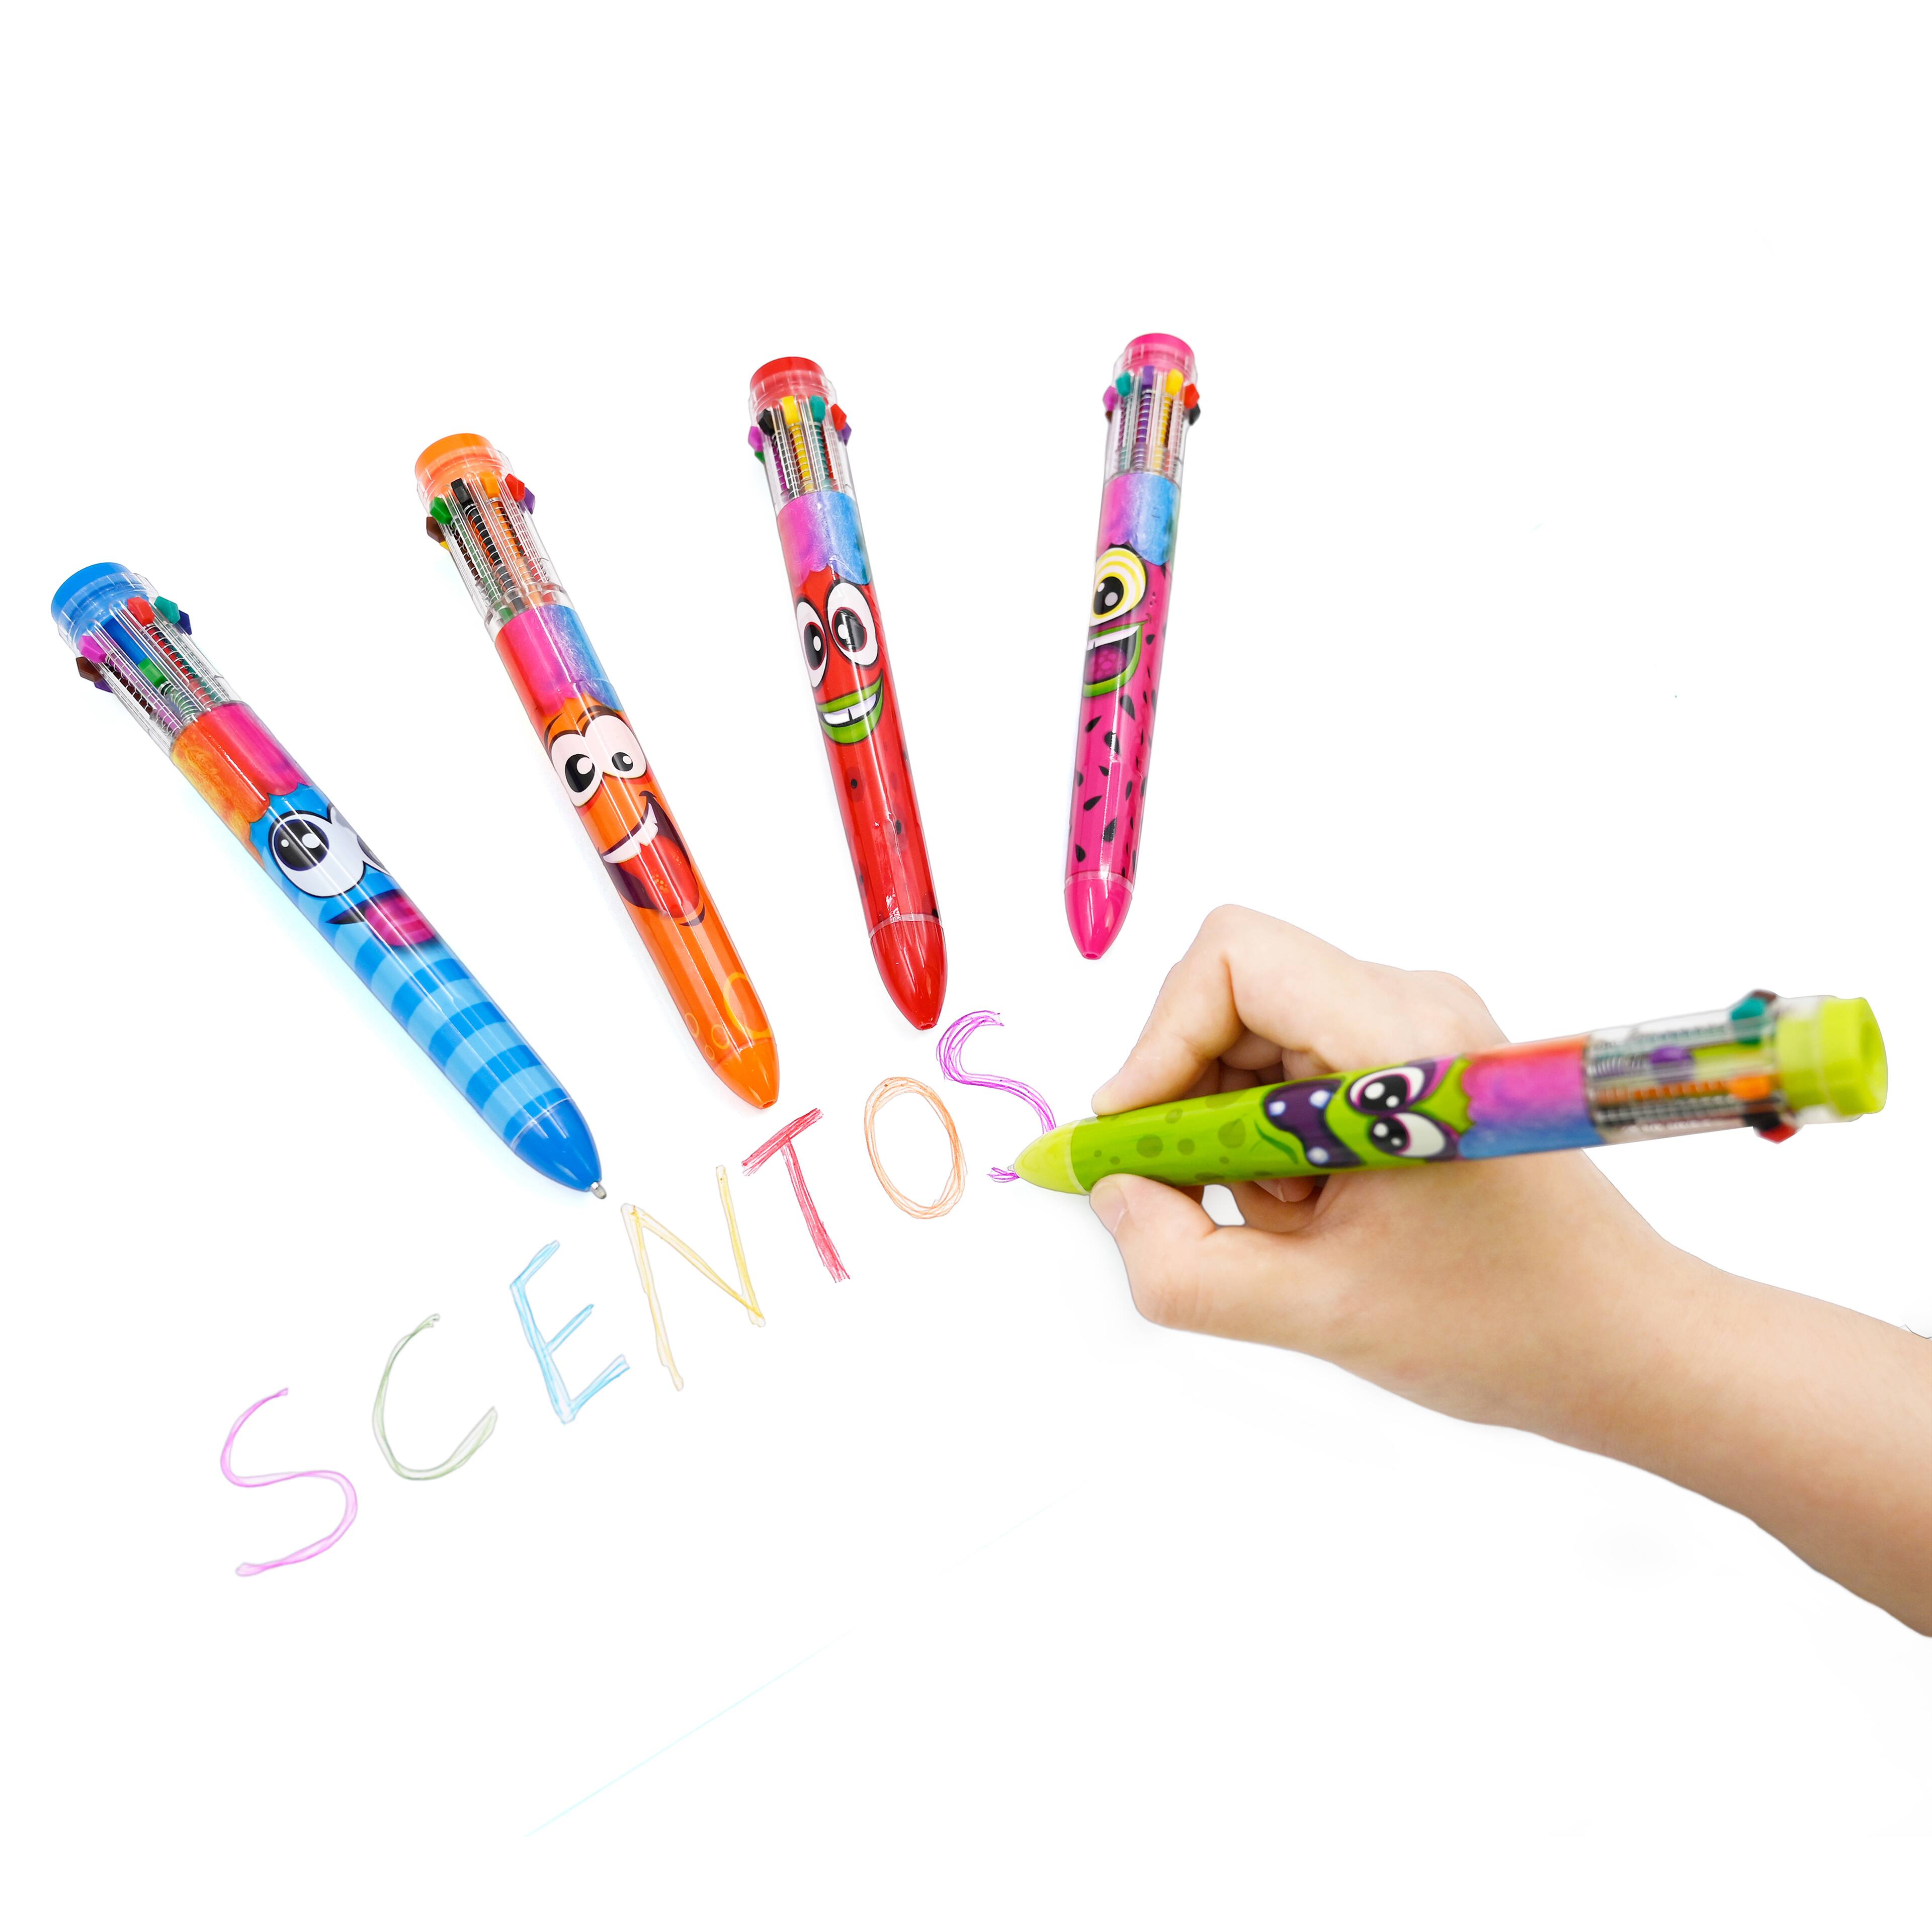 Candy Scented Rainbow Pens - 24 Pens per Case